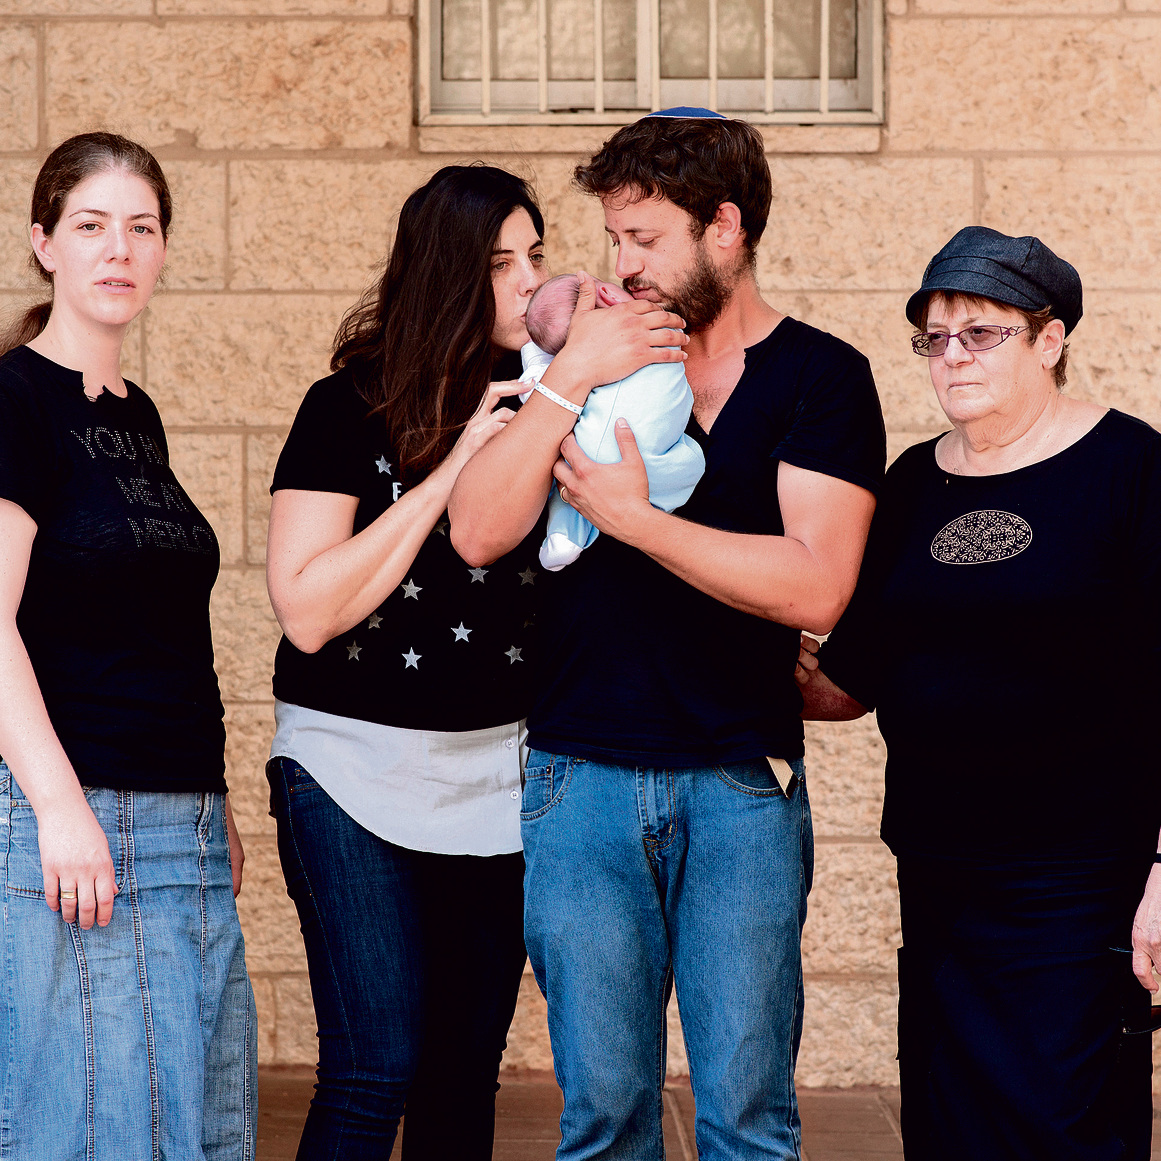 From right to left: Tova Salomon, who lost her husband and two children, her son Shmuel with his wife Chen and baby Ari Yosef, and her daughter-in-law Michal, Elad's widow (Photo: Yuval Chen)